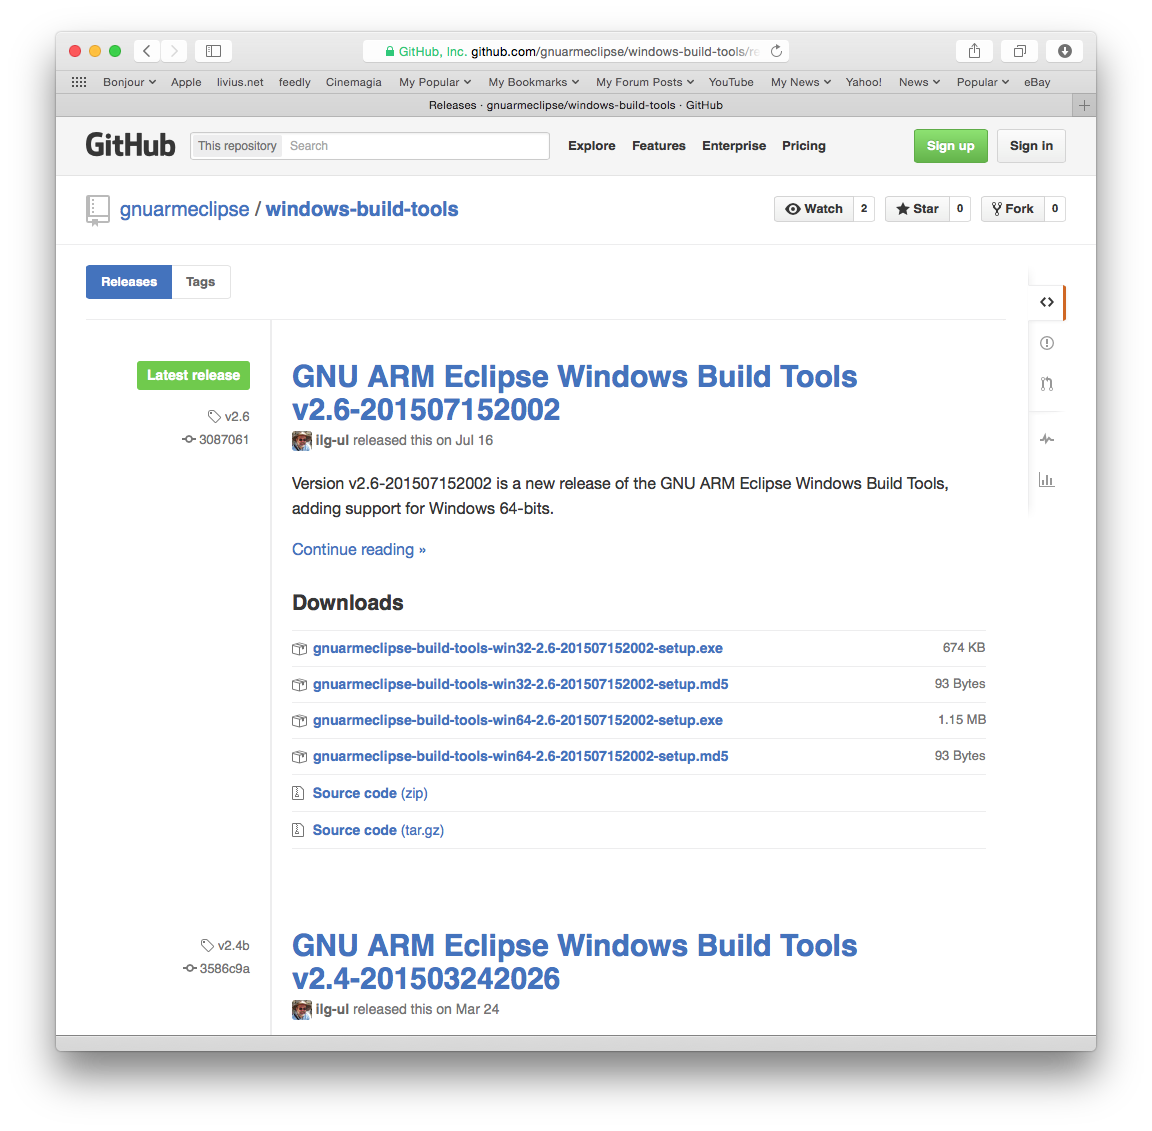 The Windows Build Tools Releases page